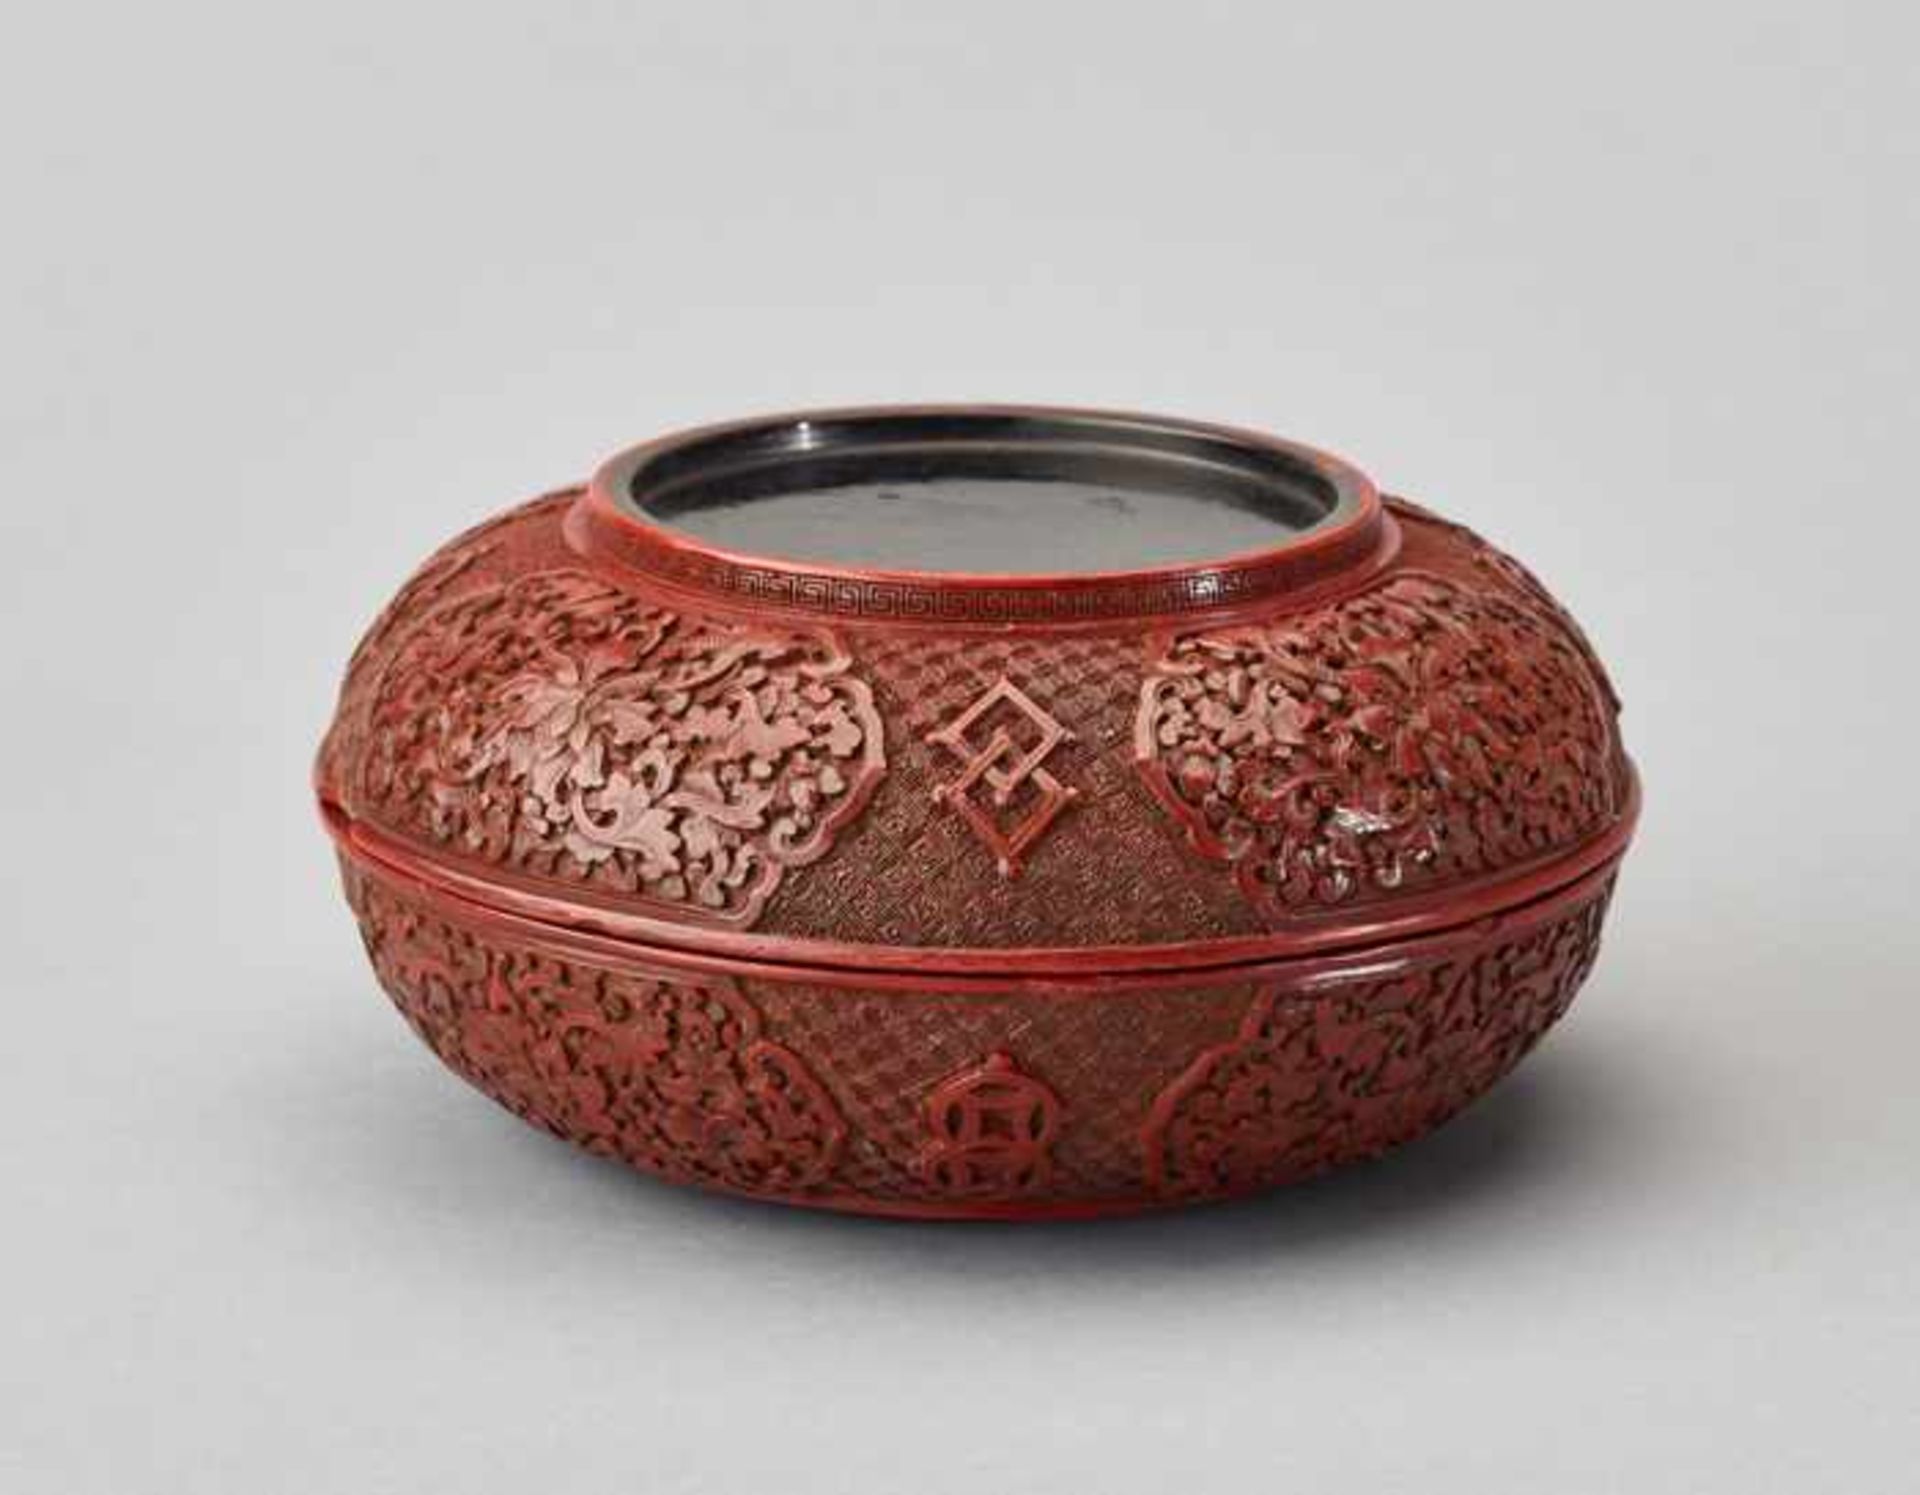 A ‘SCHOLARS AND PUPILS’ CINNABAR LACQUER BOX, 17th-18th CENTURY Massive and heavy cast metal box - Image 5 of 7